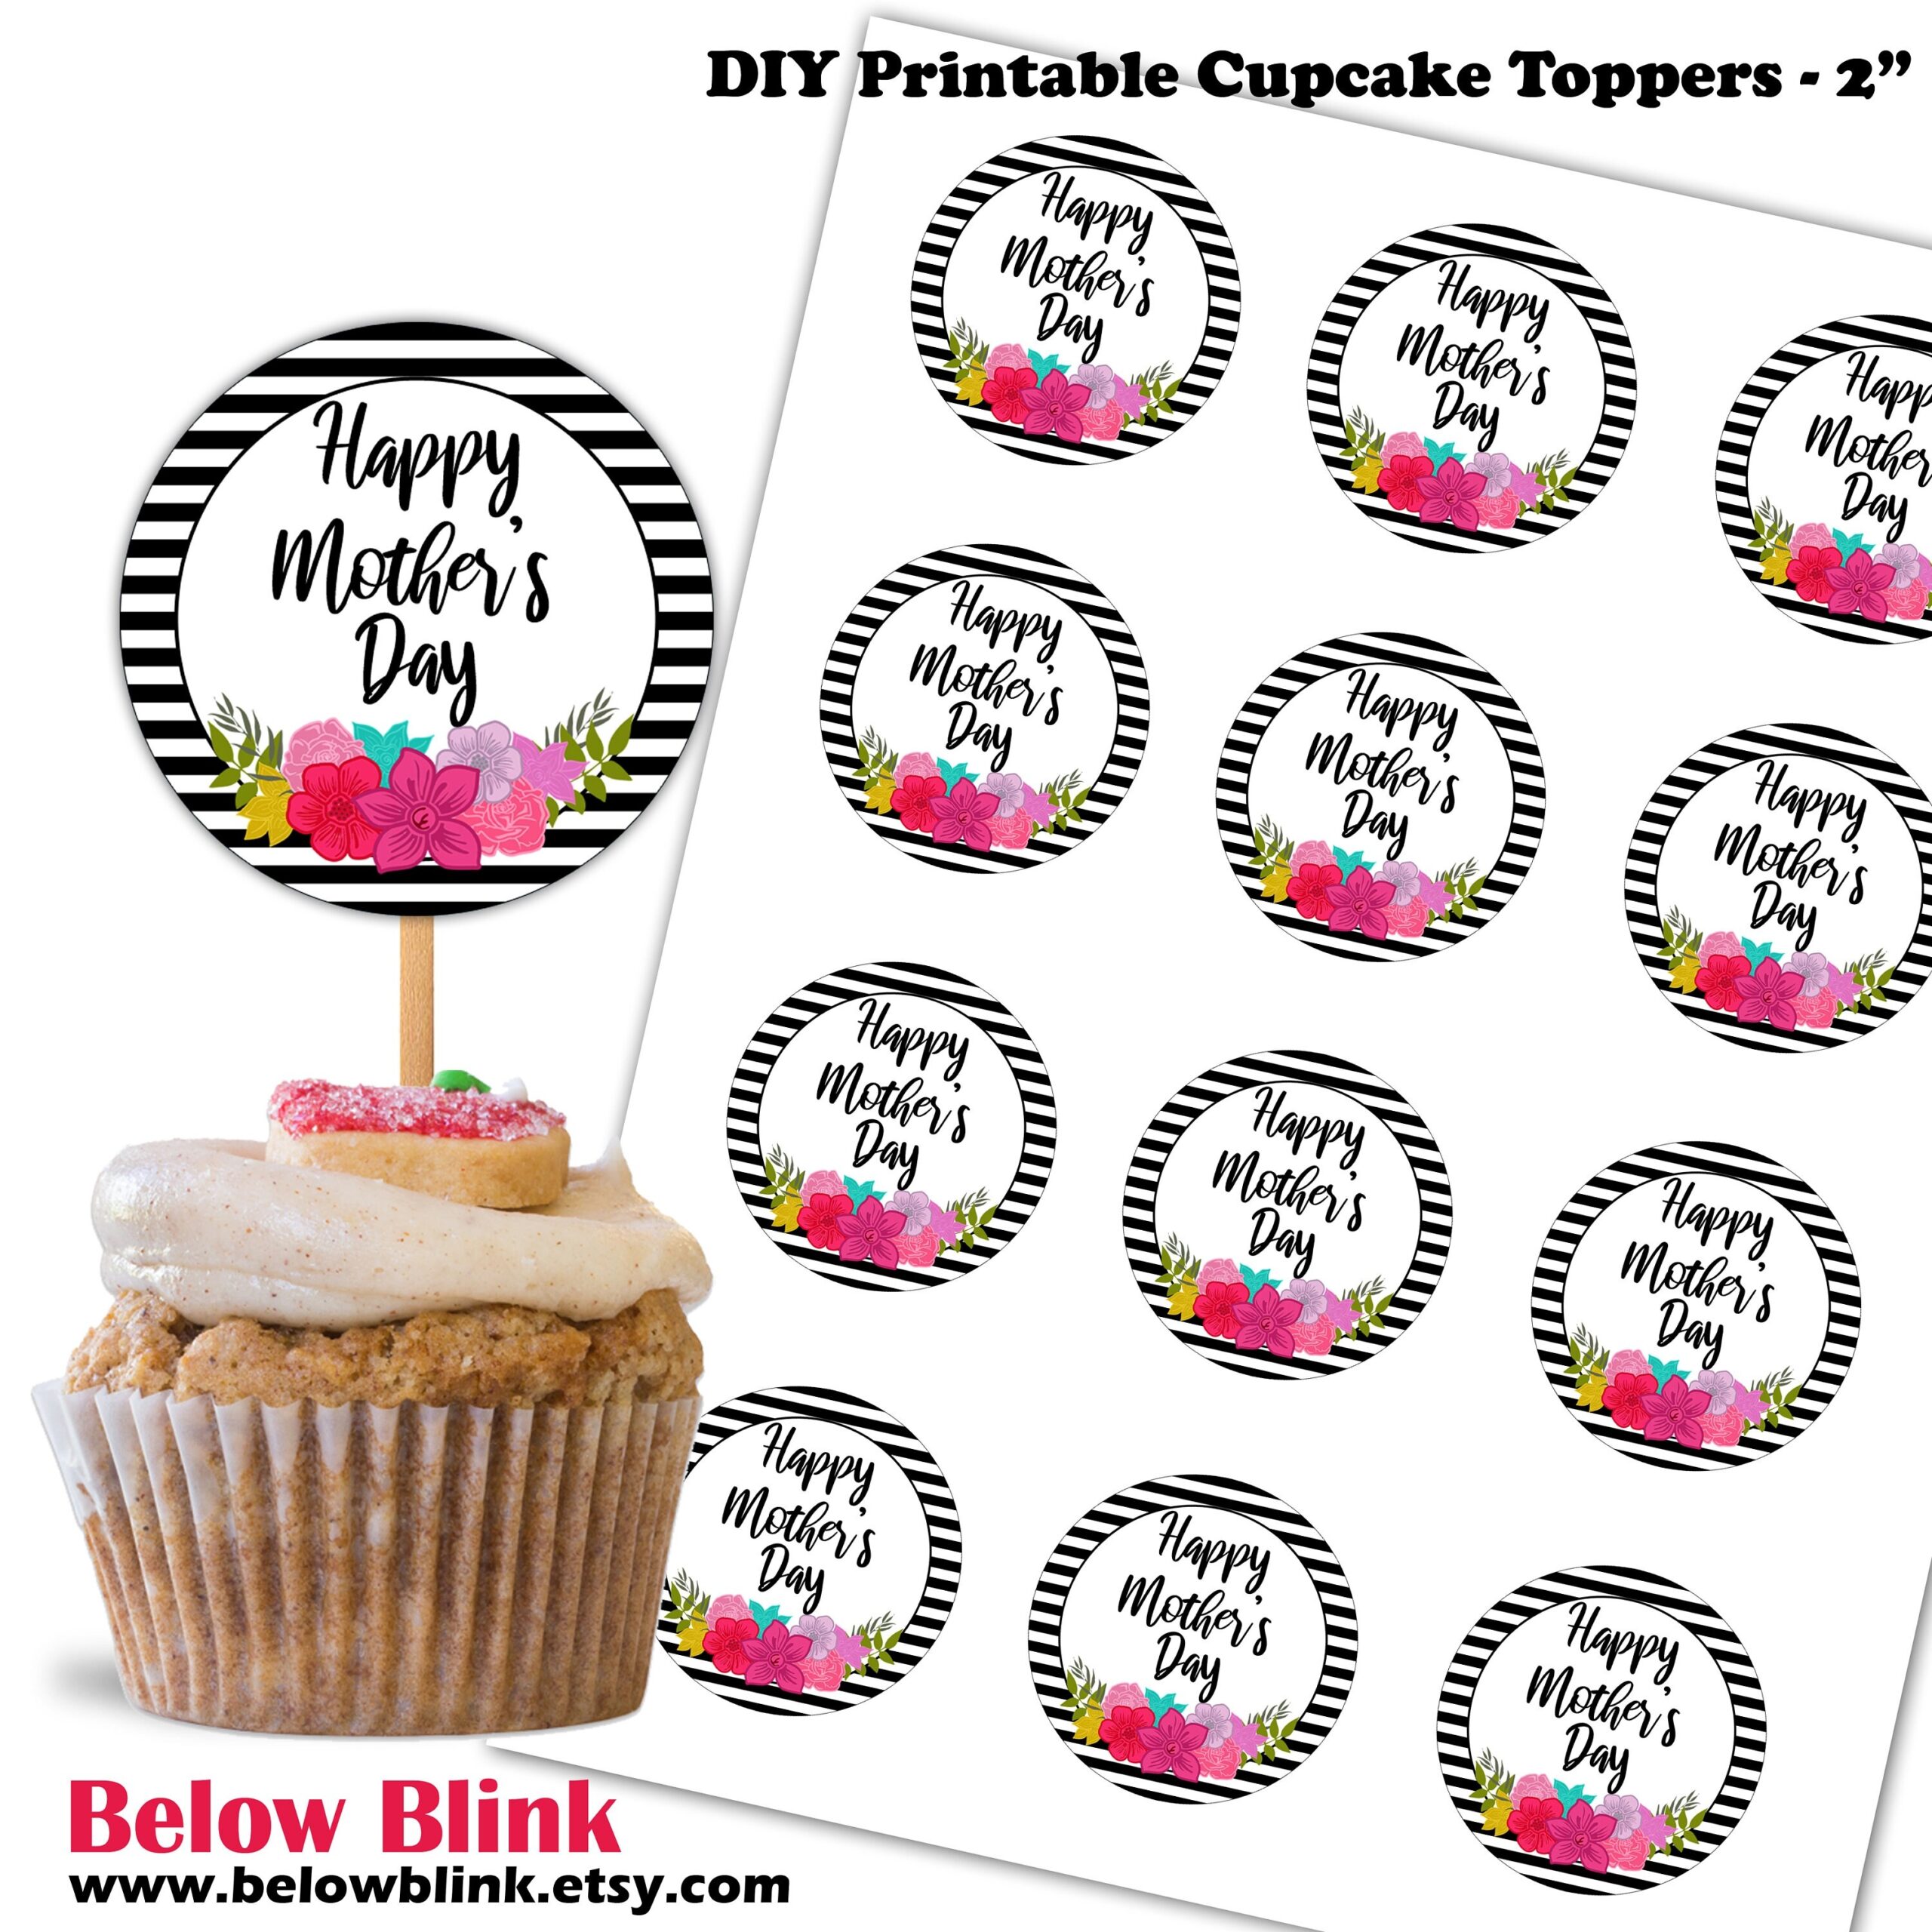 Happy Mothers Day Cupcake Toppers Printable Tags Favors Mother s Day Party Circles Party Decor Instant Download DP832 Etsy